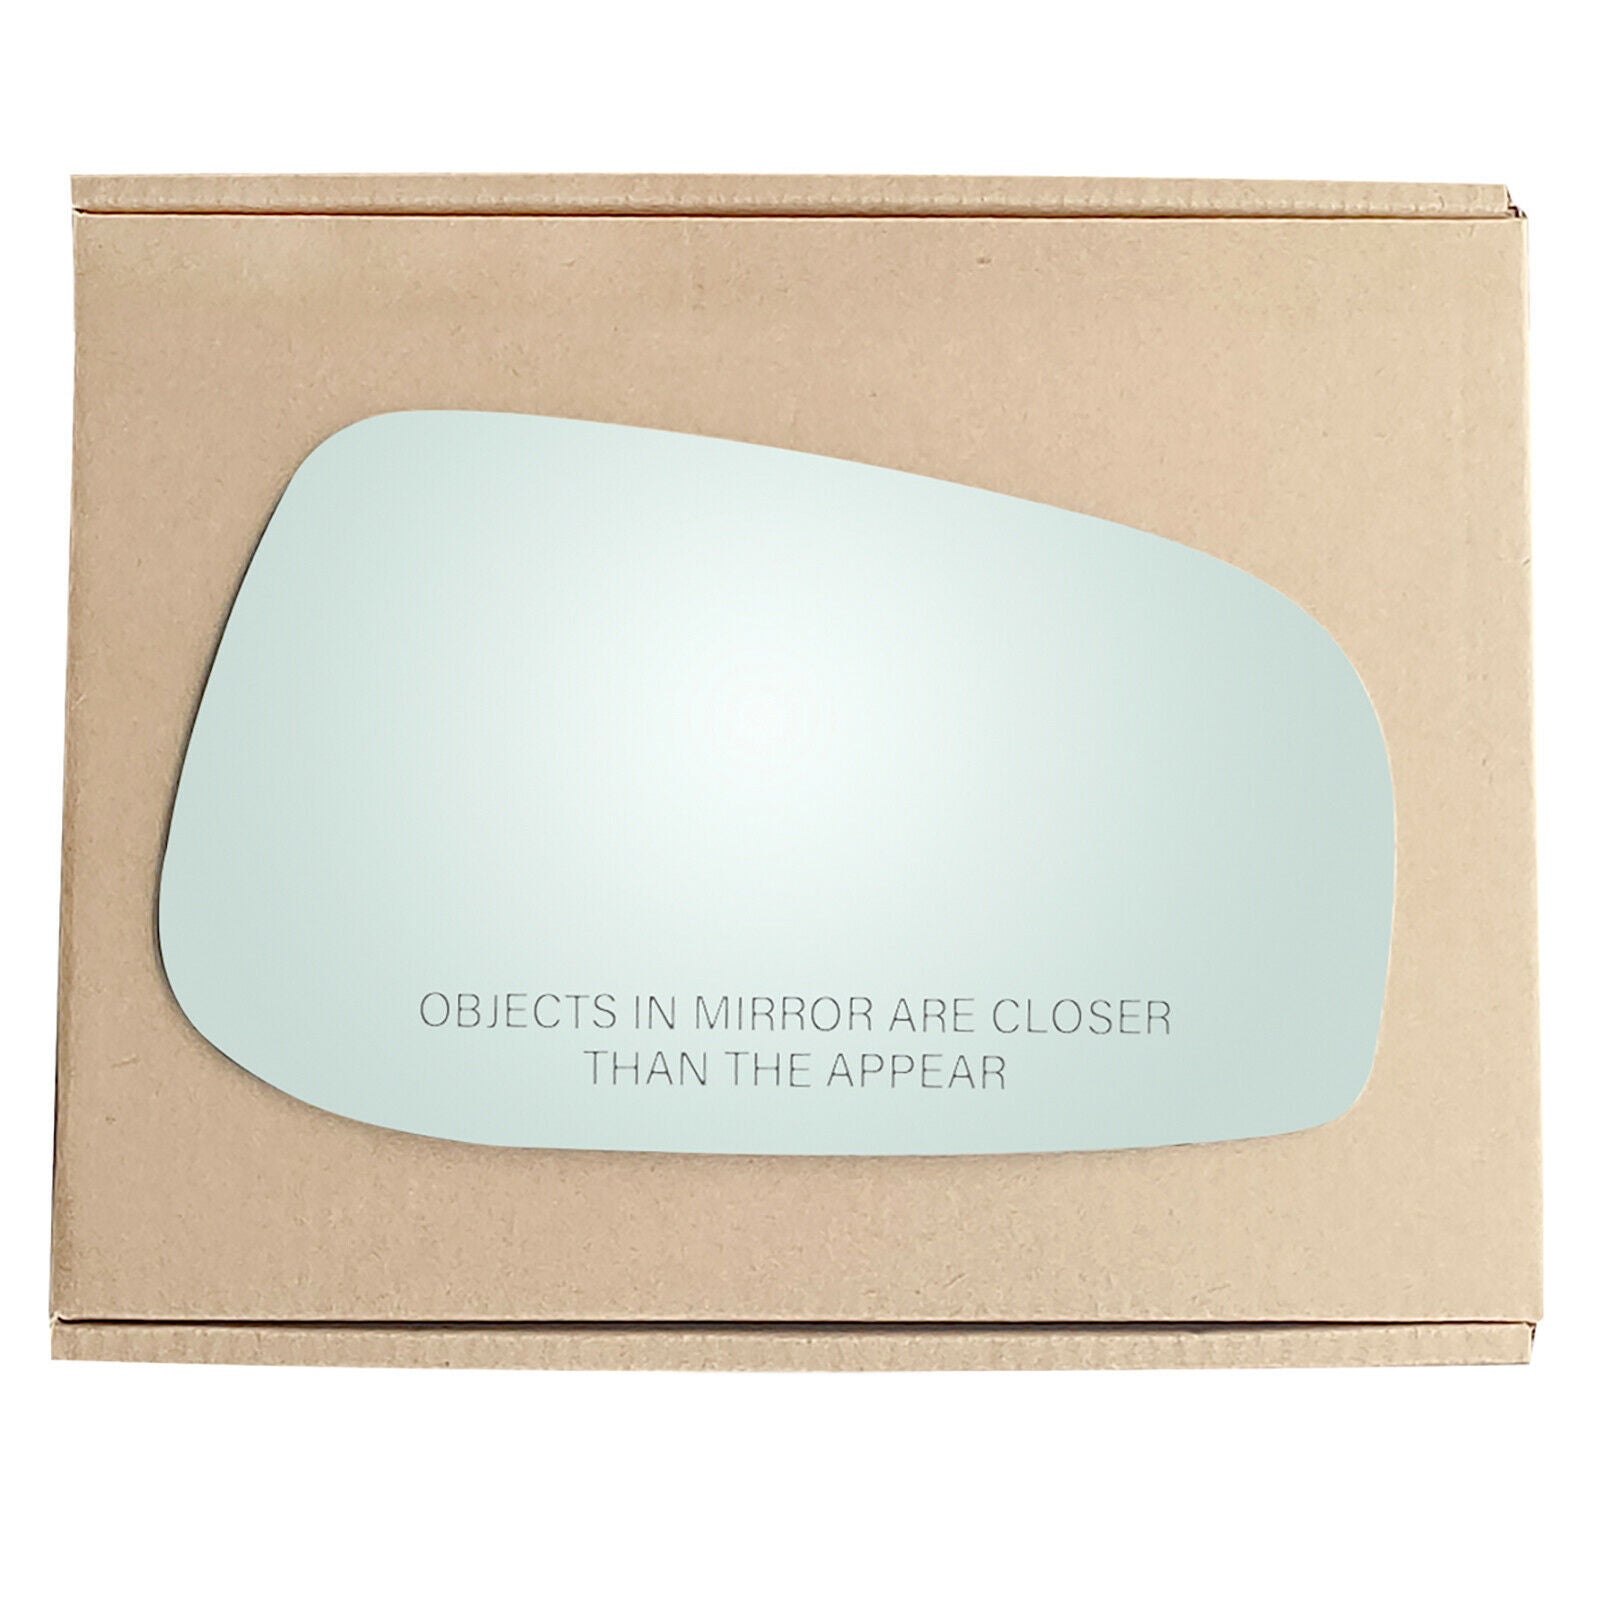 WLLW Mirror Glass Replacement for Volvo 2004-2006 S60 S80 V70, Driver Left Side LH/Passenger Right Side RH/The Both Sides Flat Convex M-0026